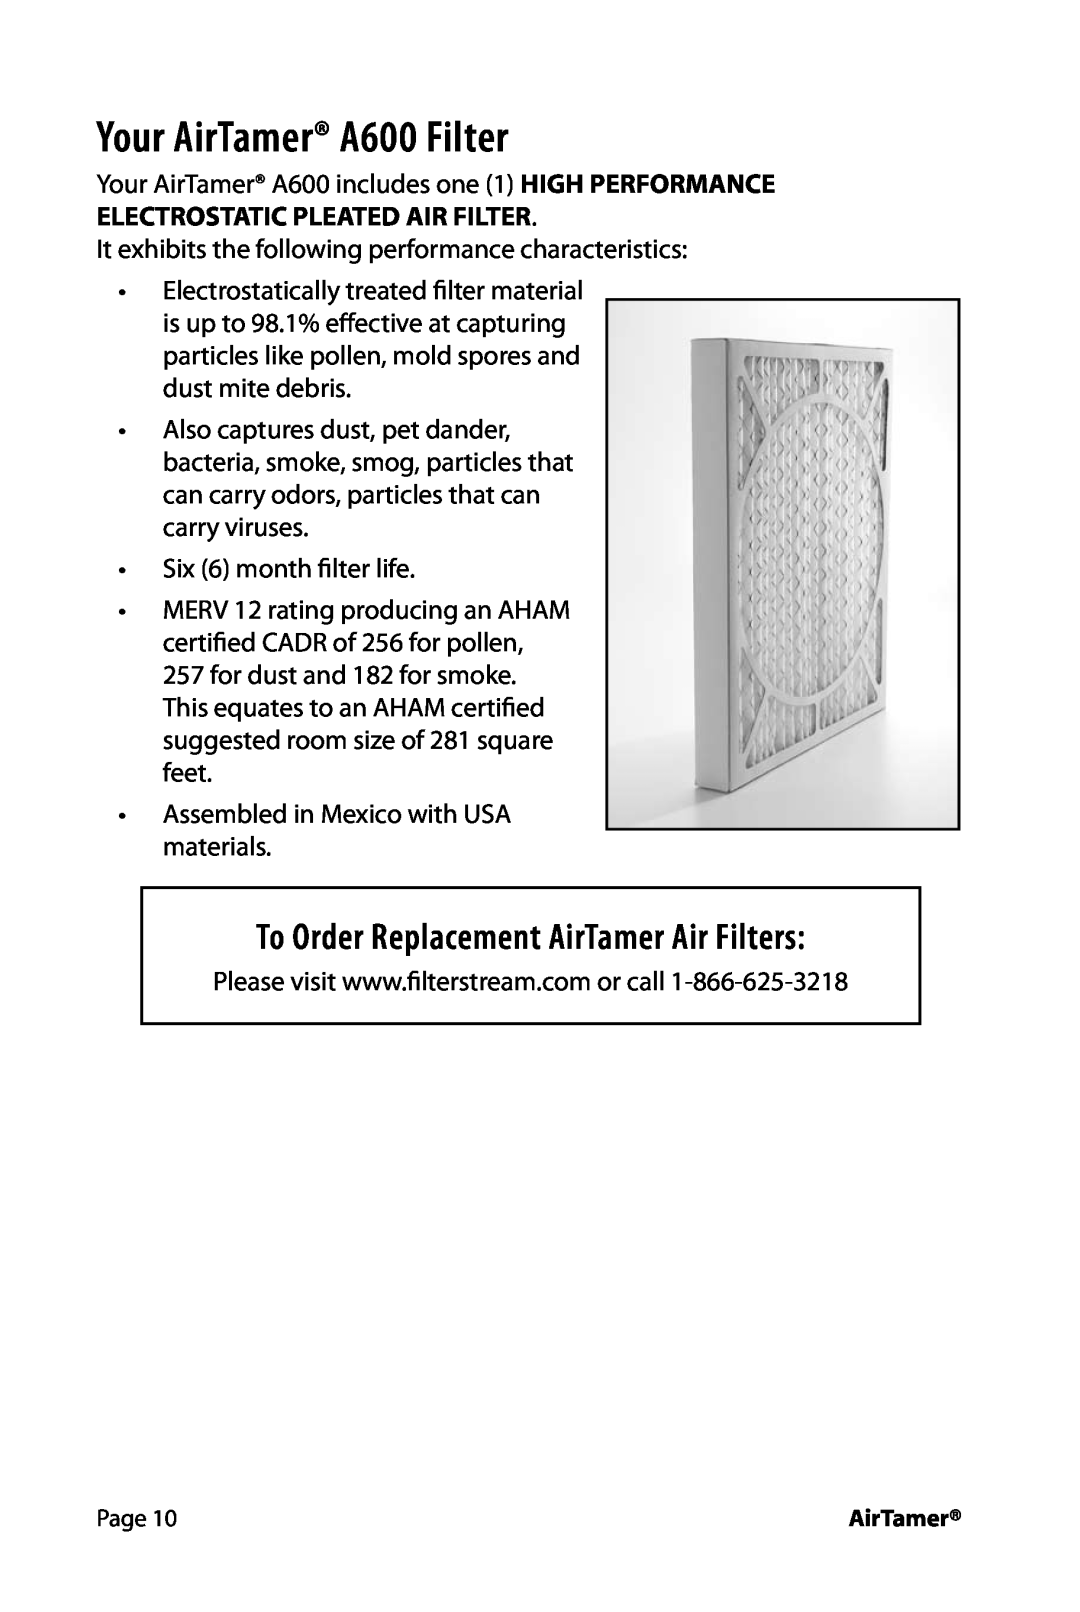 FilterStream instruction manual Your AirTamer A600 Filter, To Order Replacement AirTamer Air Filters 